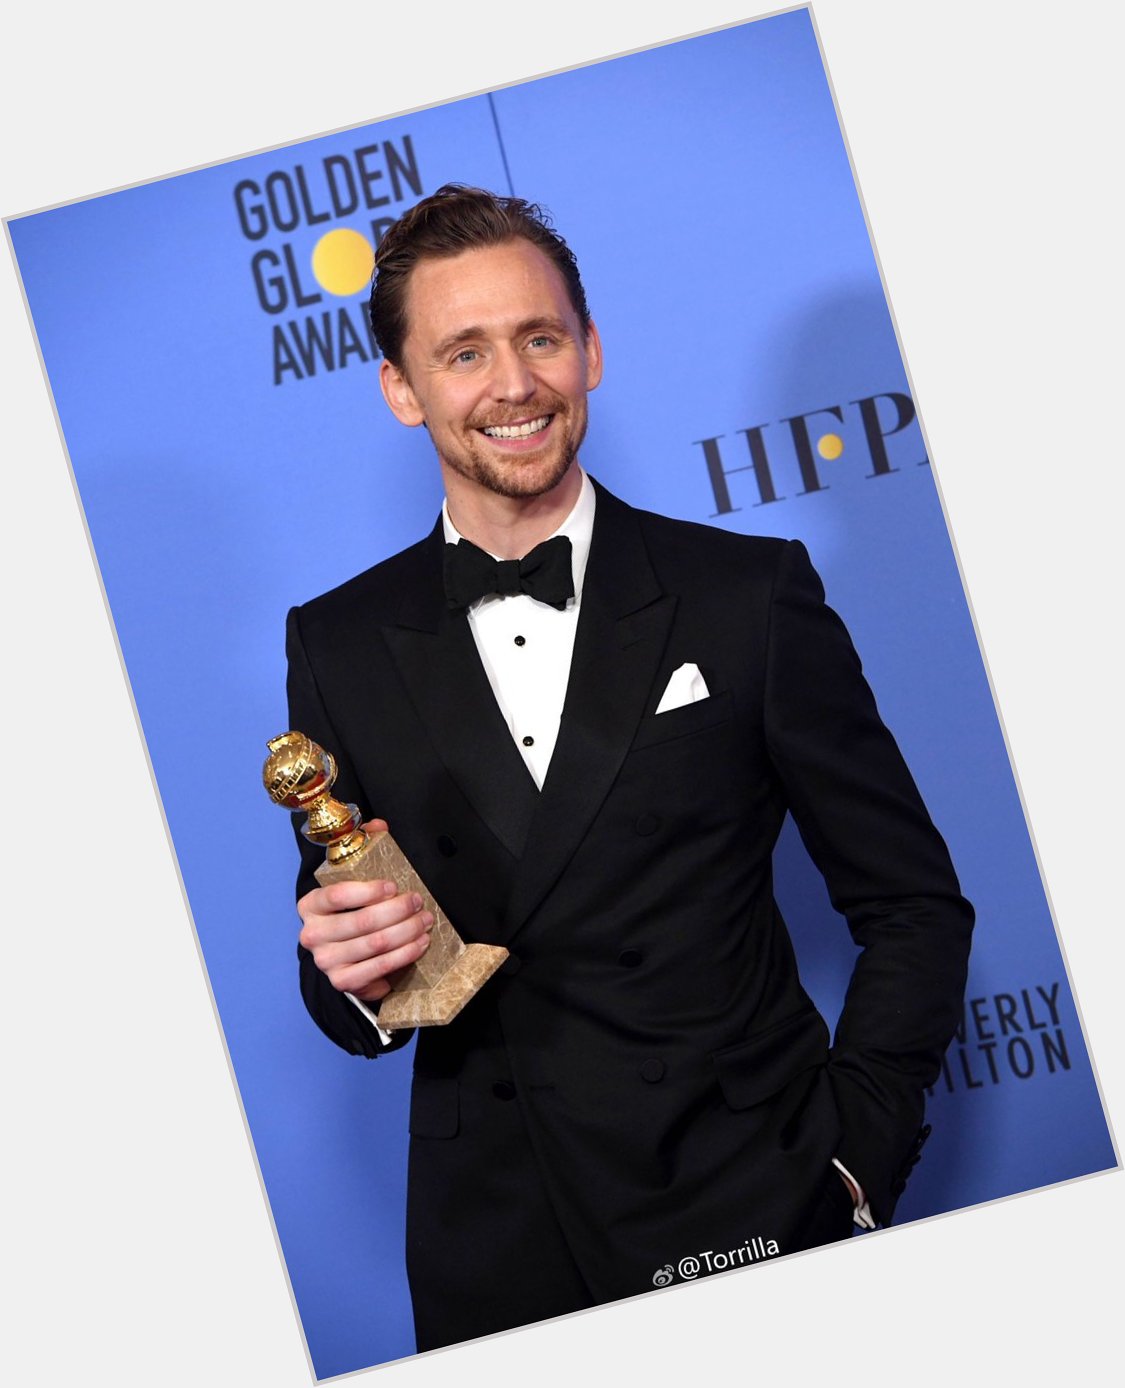  Happy Birthday! Hope you have an awesome day! Hope you\re day is full of Mr. Tom Hiddleston 